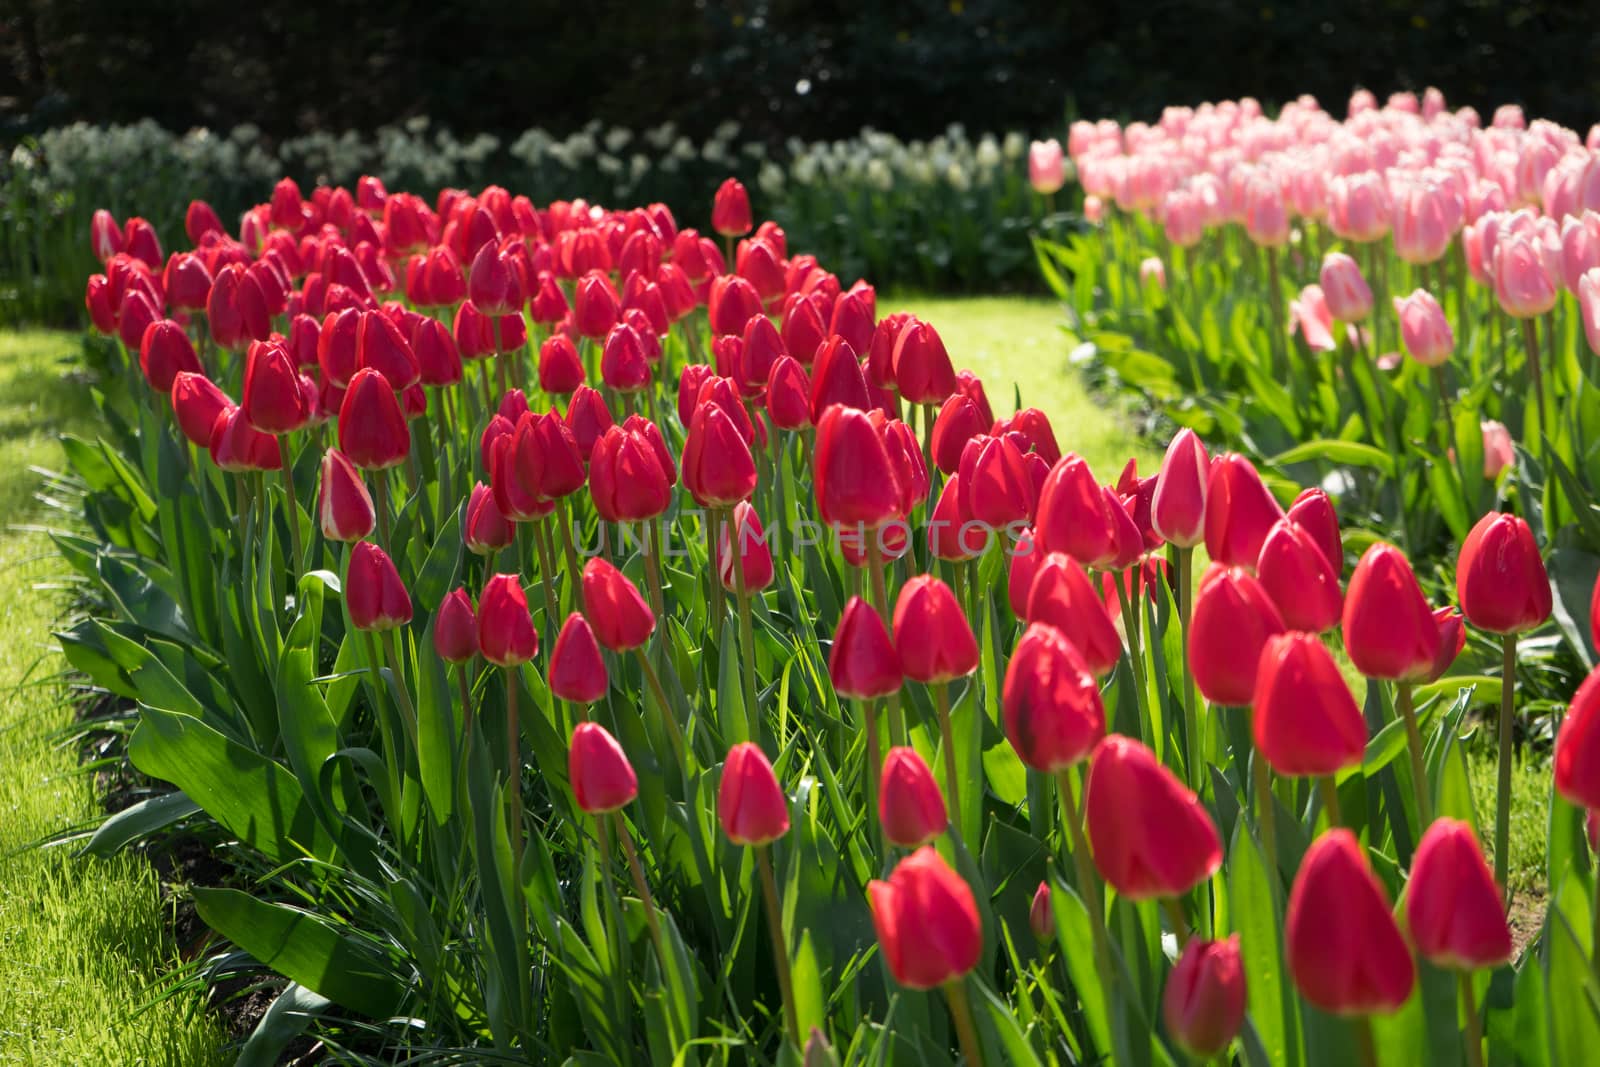 pink and rose colored Tulips in a garden in Lisse, Netherlands, europe with grass on a bright summer day